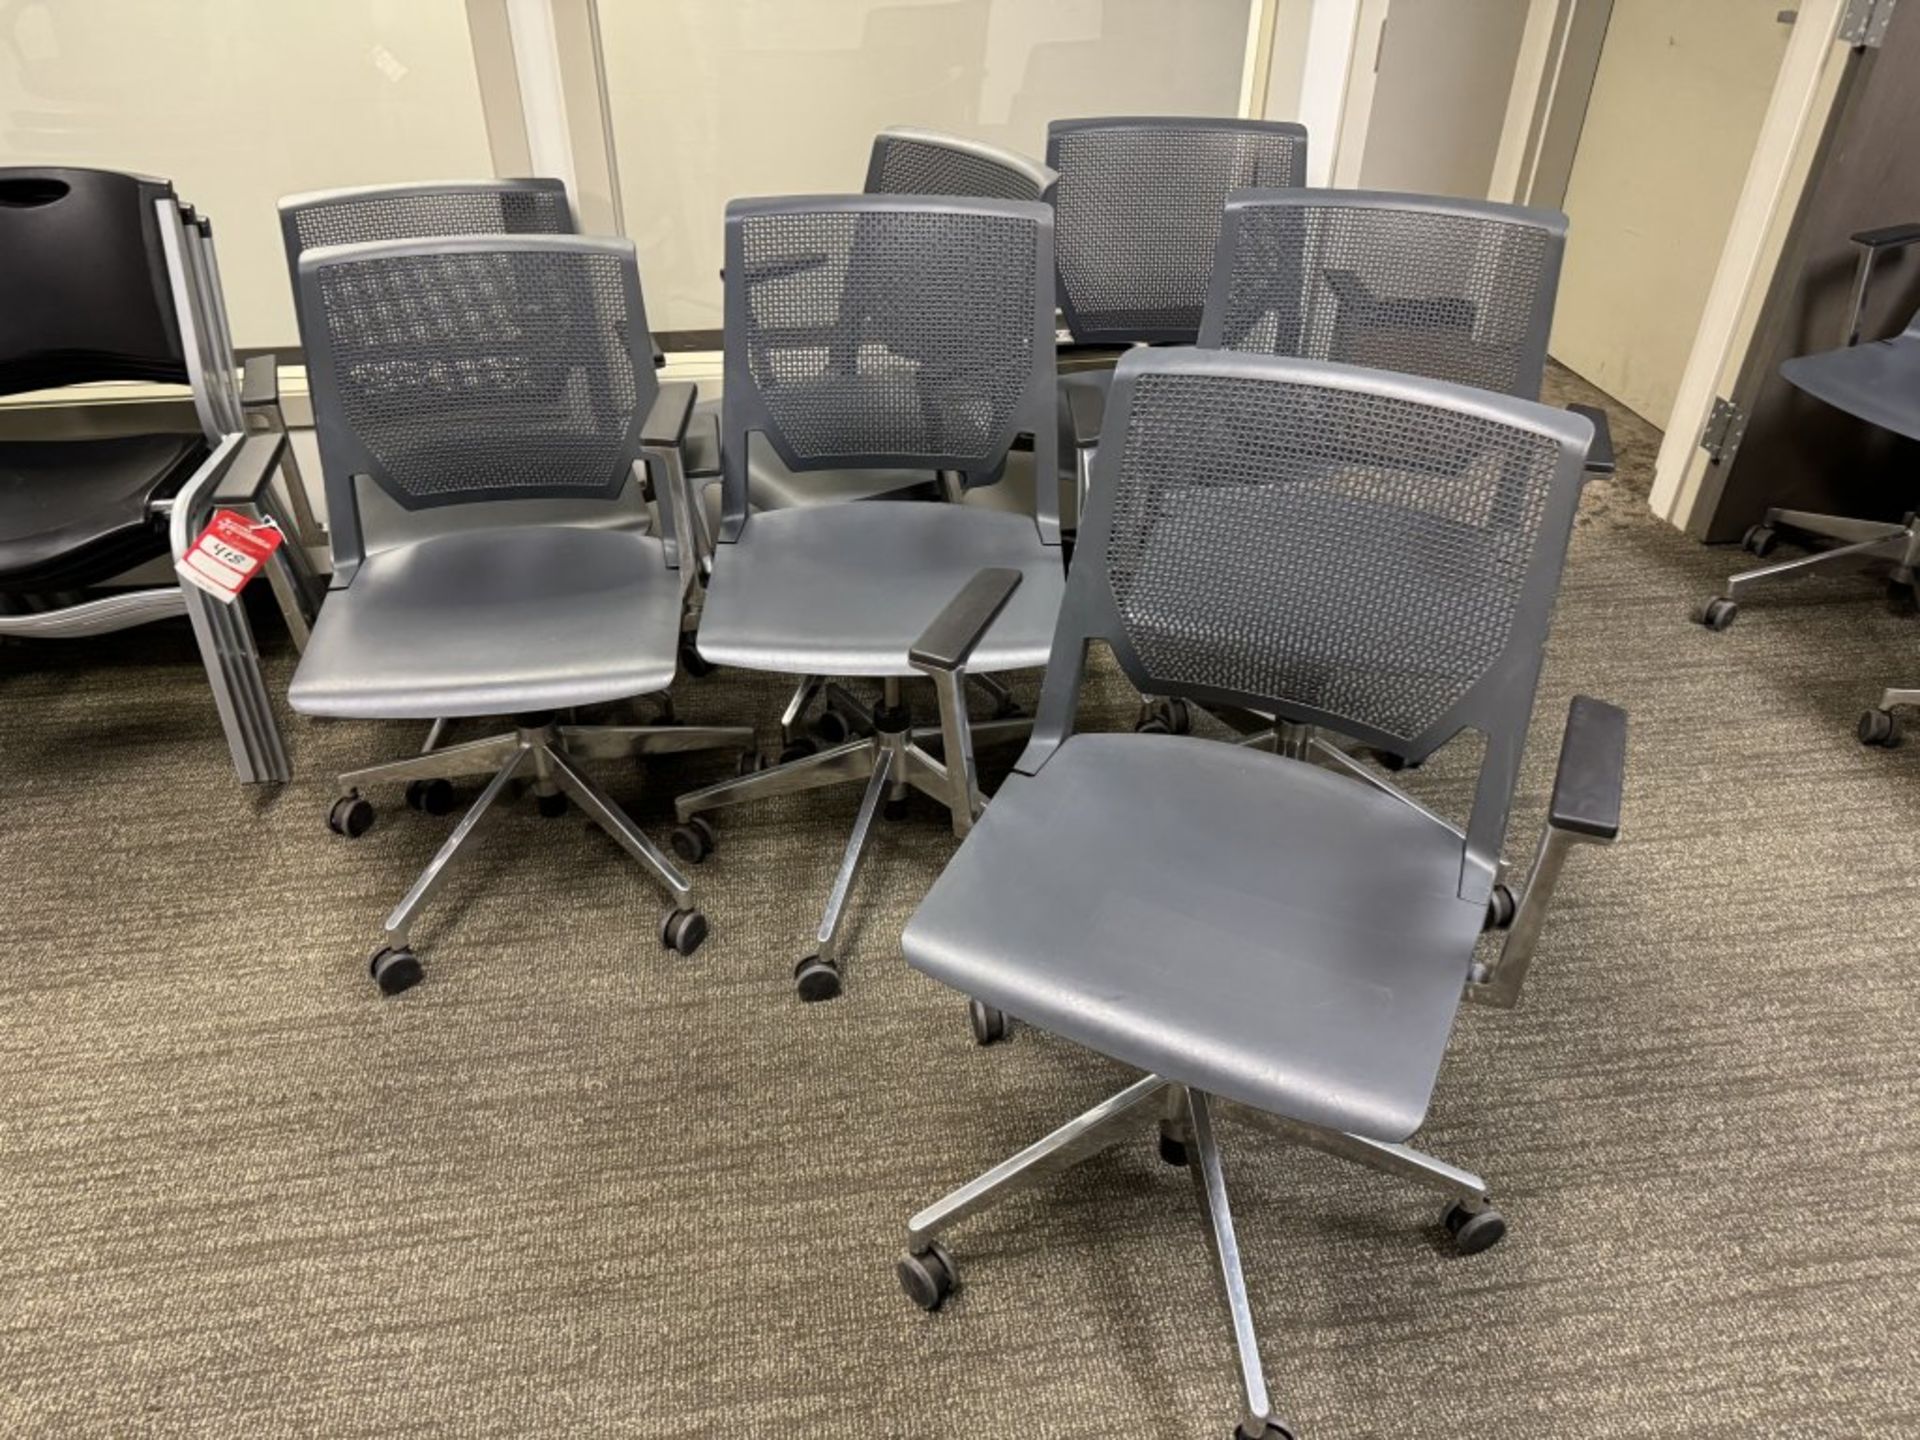 (7) MATCHING ROLLING OFFICE CHAIRS